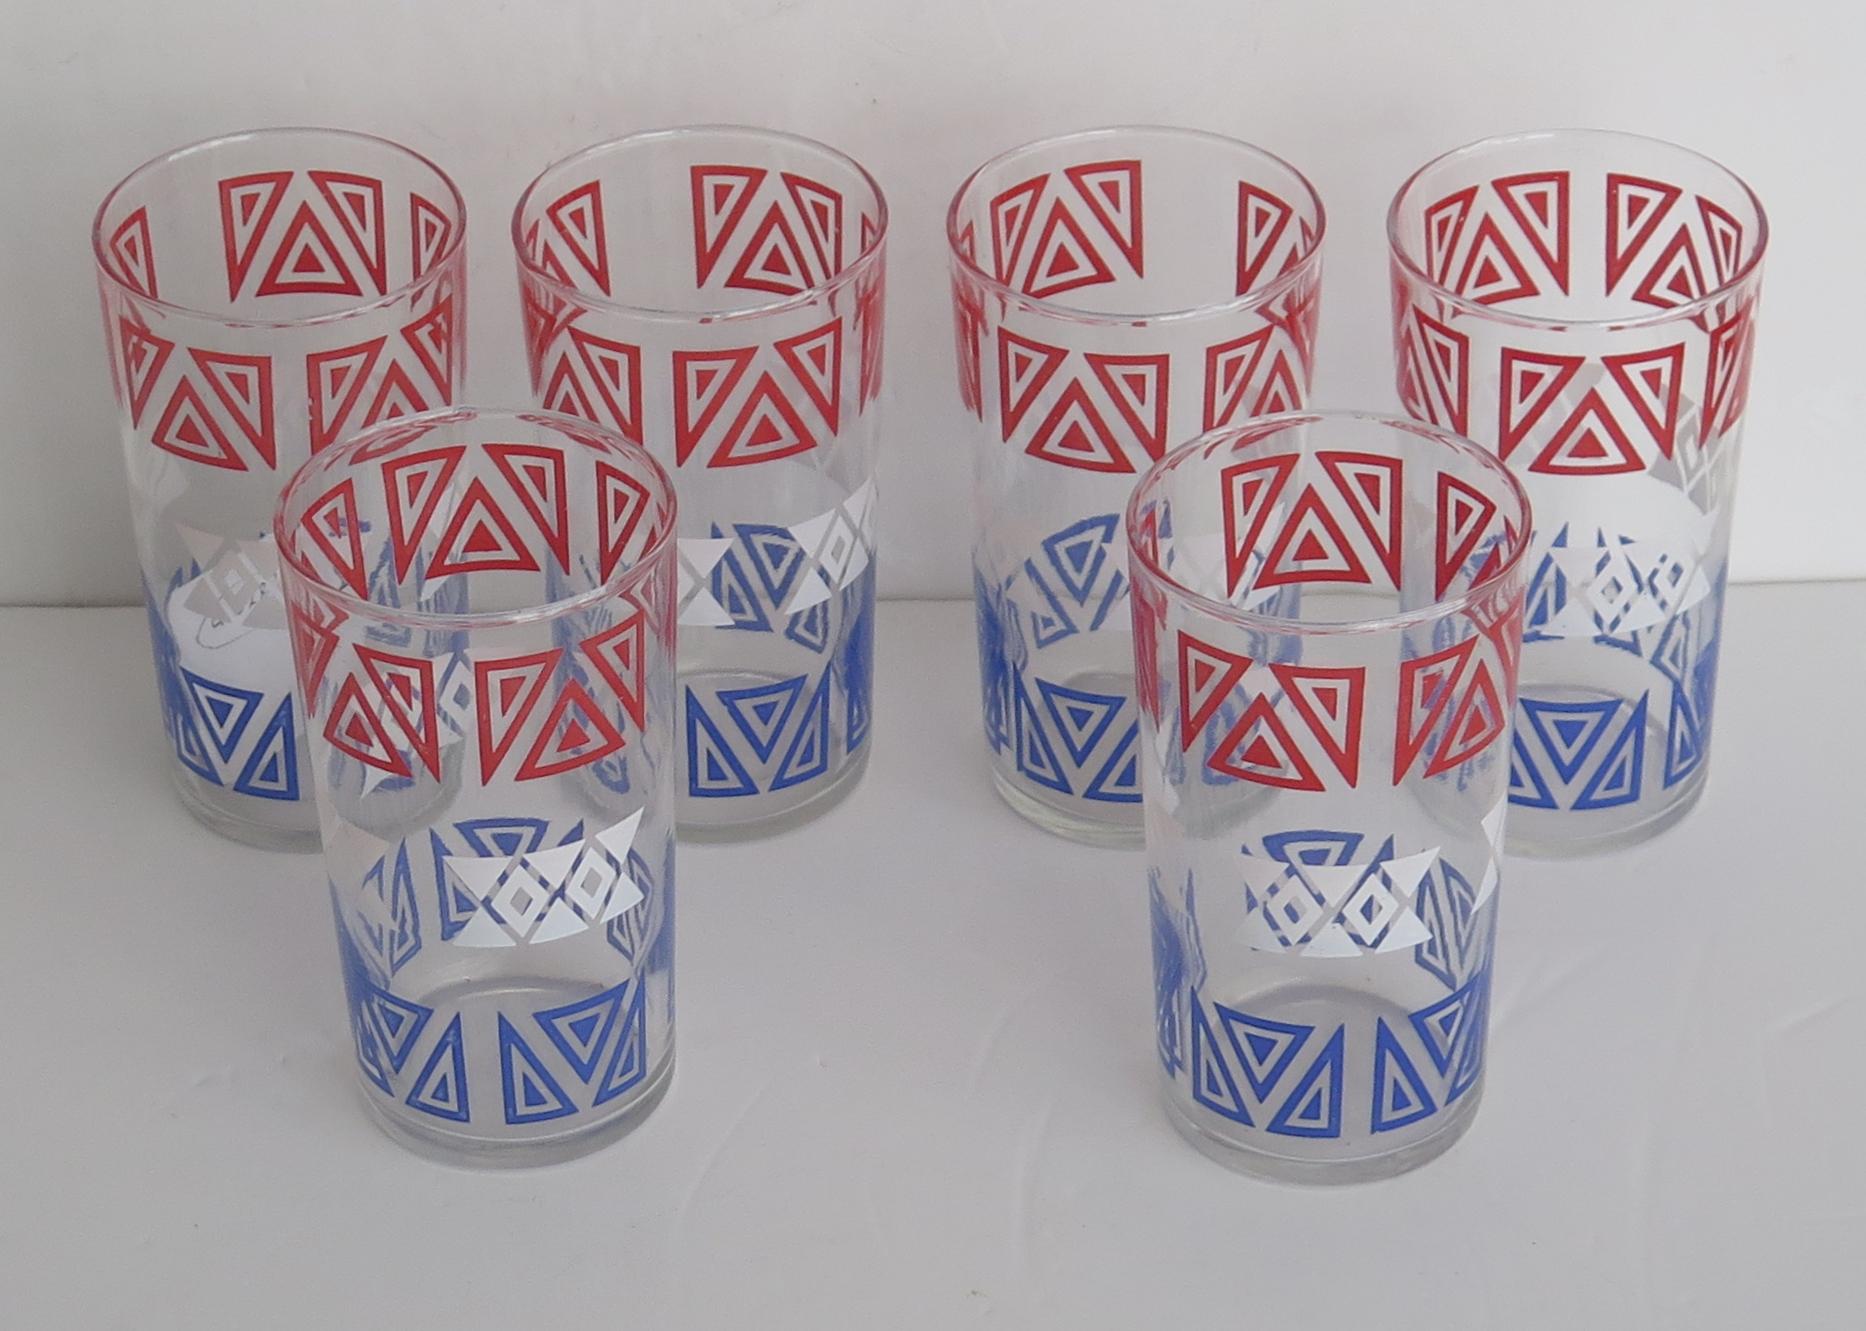 These are a good set of six Retro or Vintage glass tumblers or drinking glasses, with a red, white and blue geometric pattern, dating to the mid century modern period, circa 1950s

Each glass tumbler has a circular slightly tapered shape,